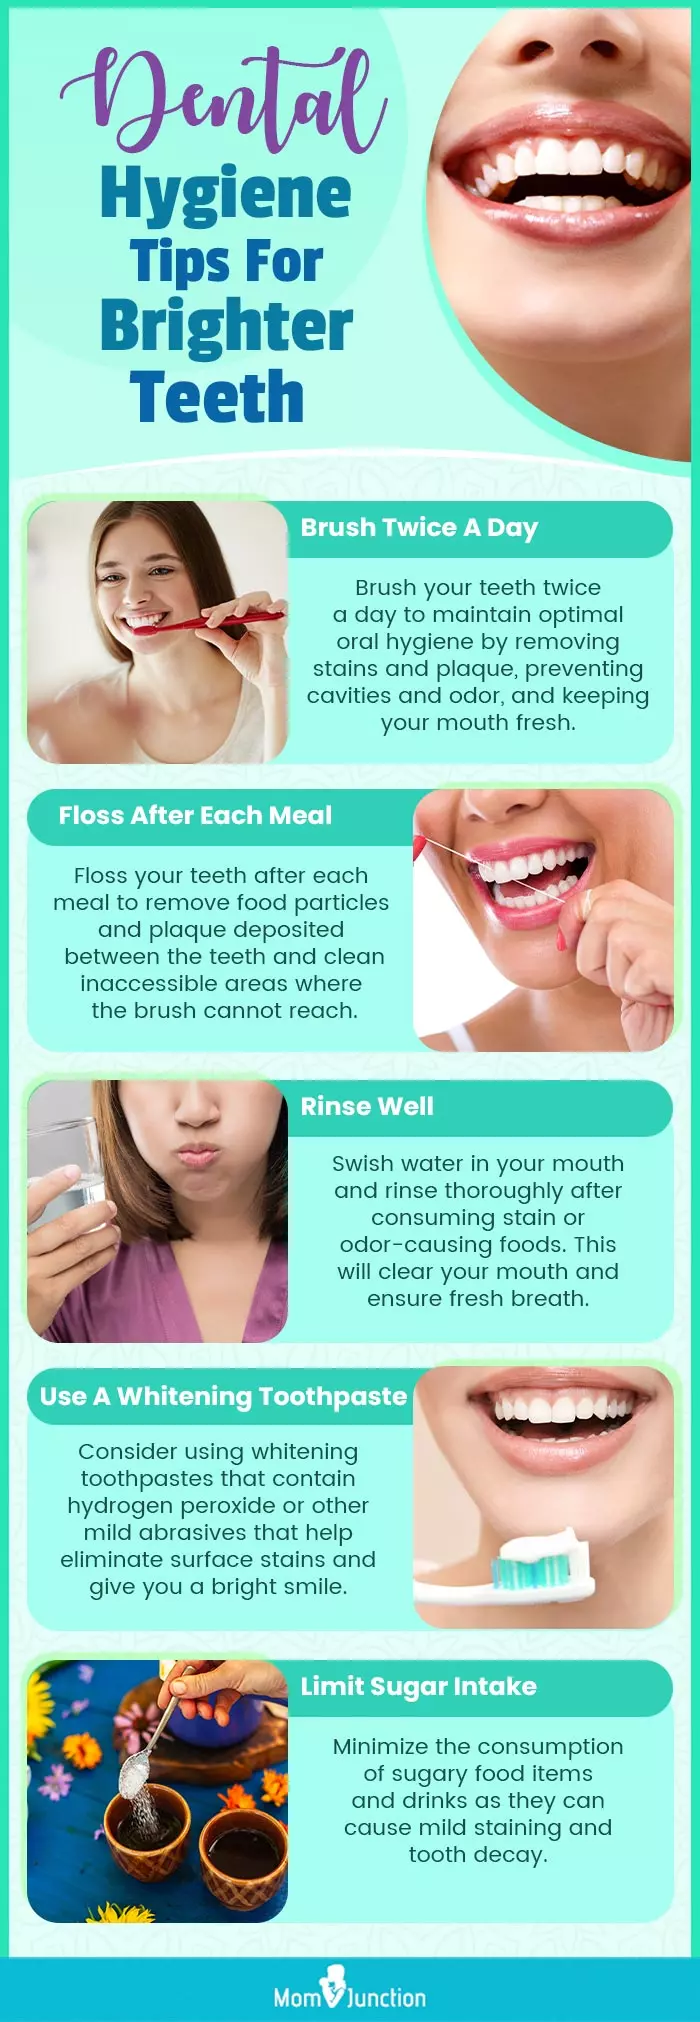 Dental Hygiene Tips For Brighter Teeth (infographic)